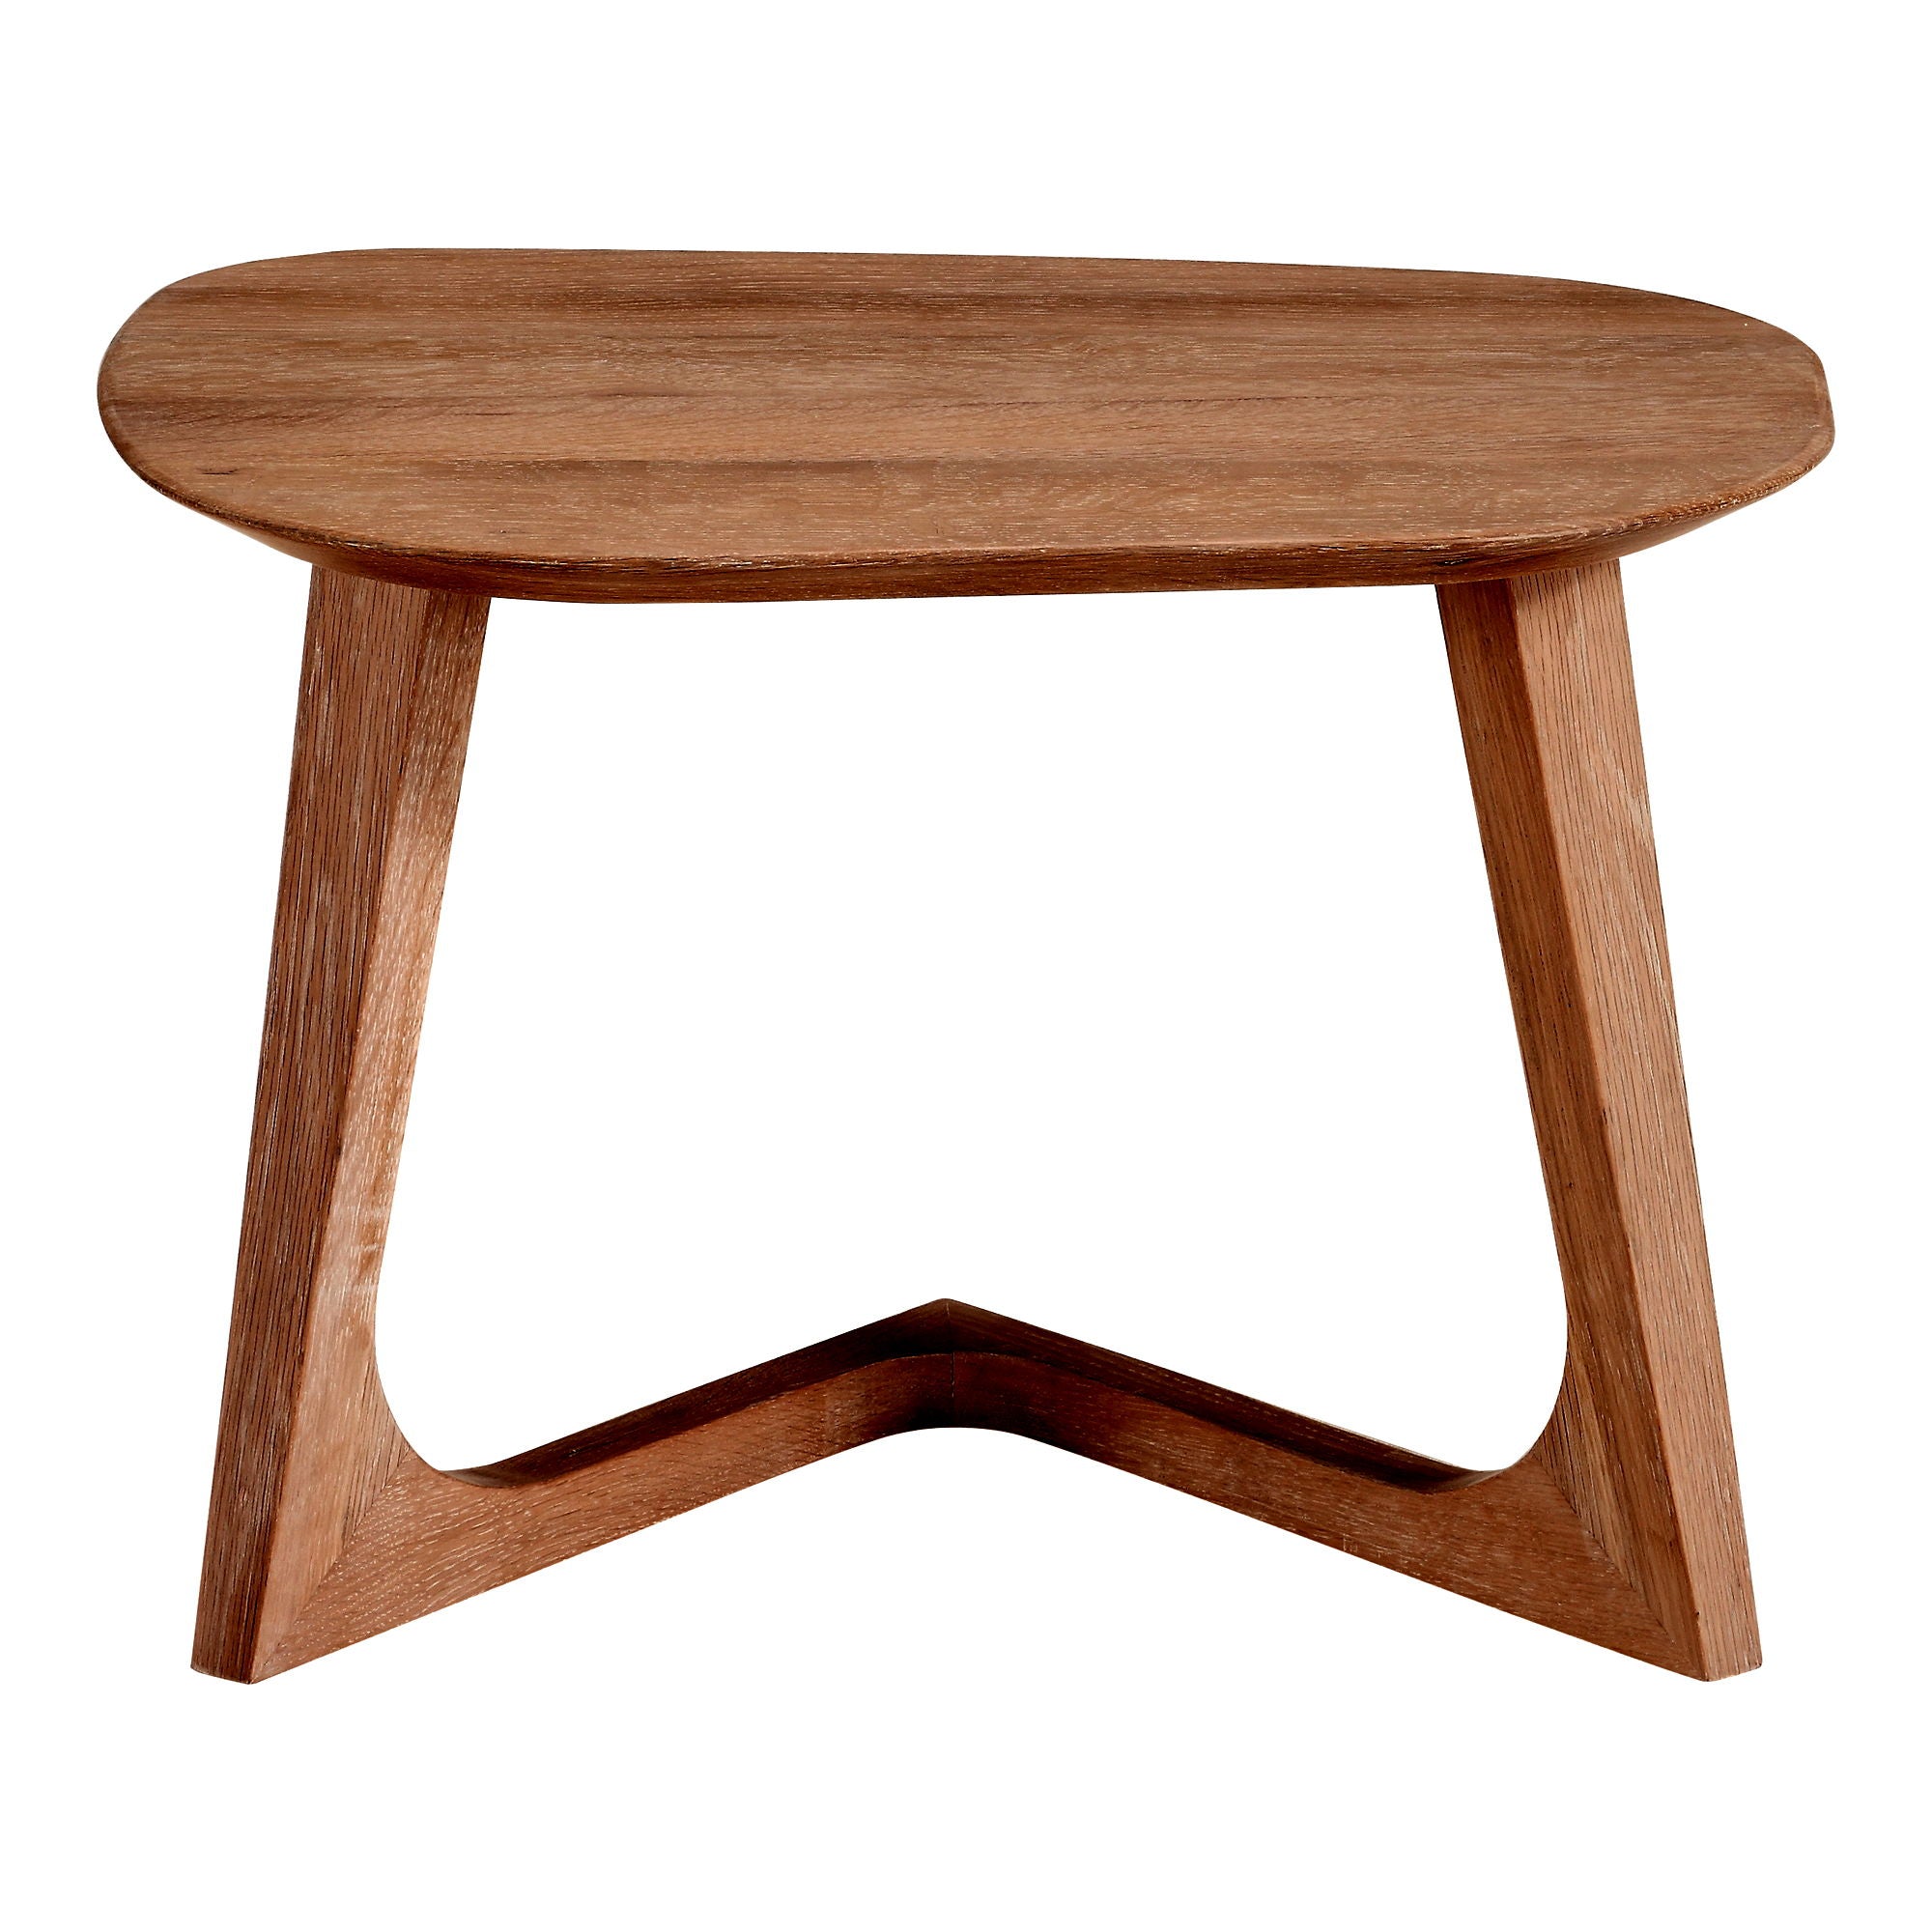 Godenza - End Table - Brown